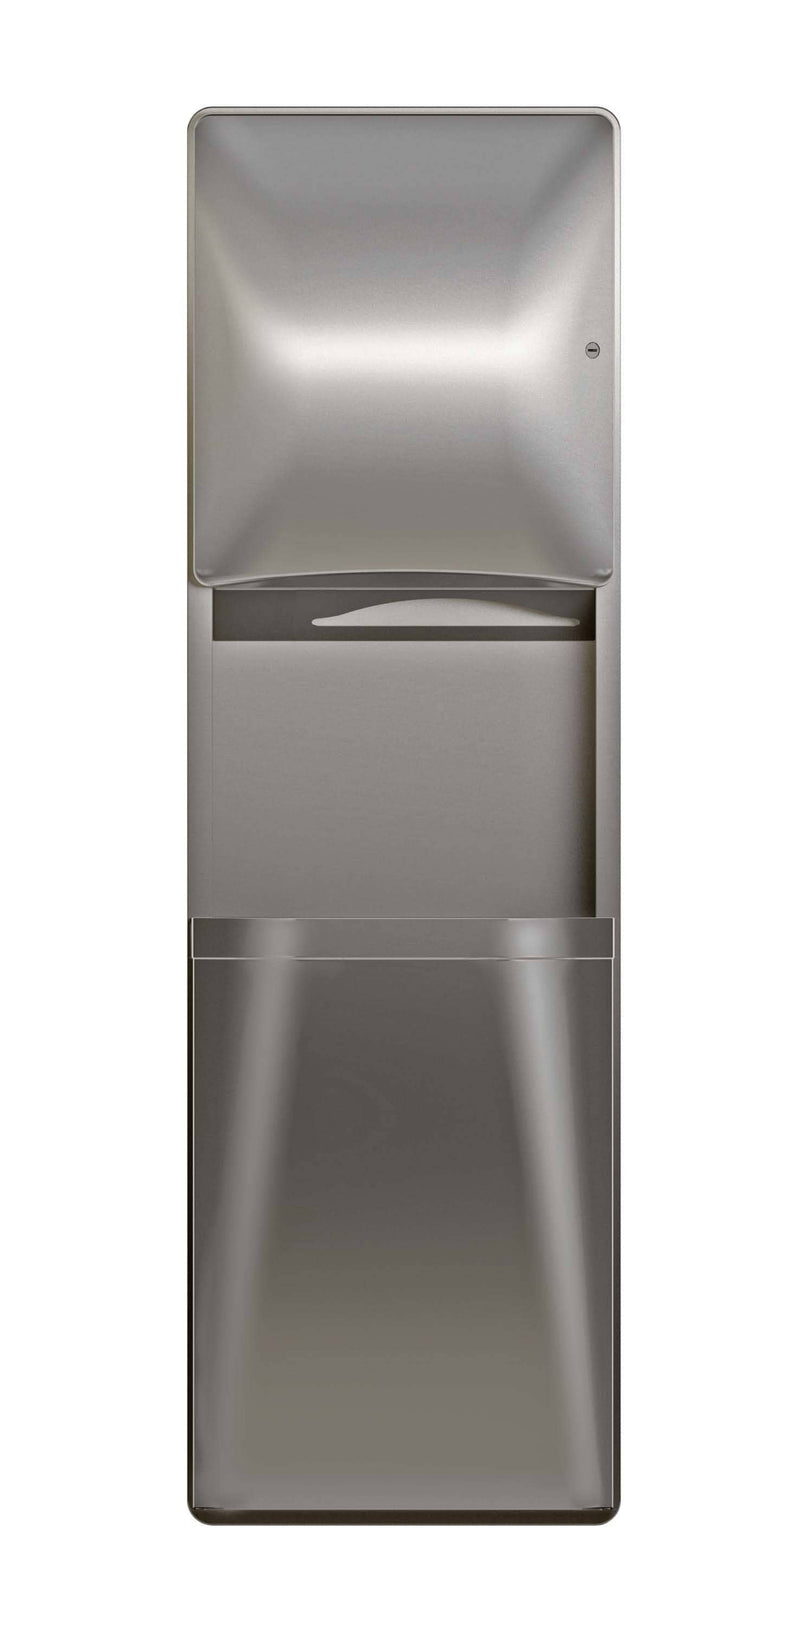 Bradley 2A05-1036 Combination Toilet Paper Dispenser/Waste Receptacle, Semi-Recessed-Mounted, Stainless Steel - TotalRestroom.com